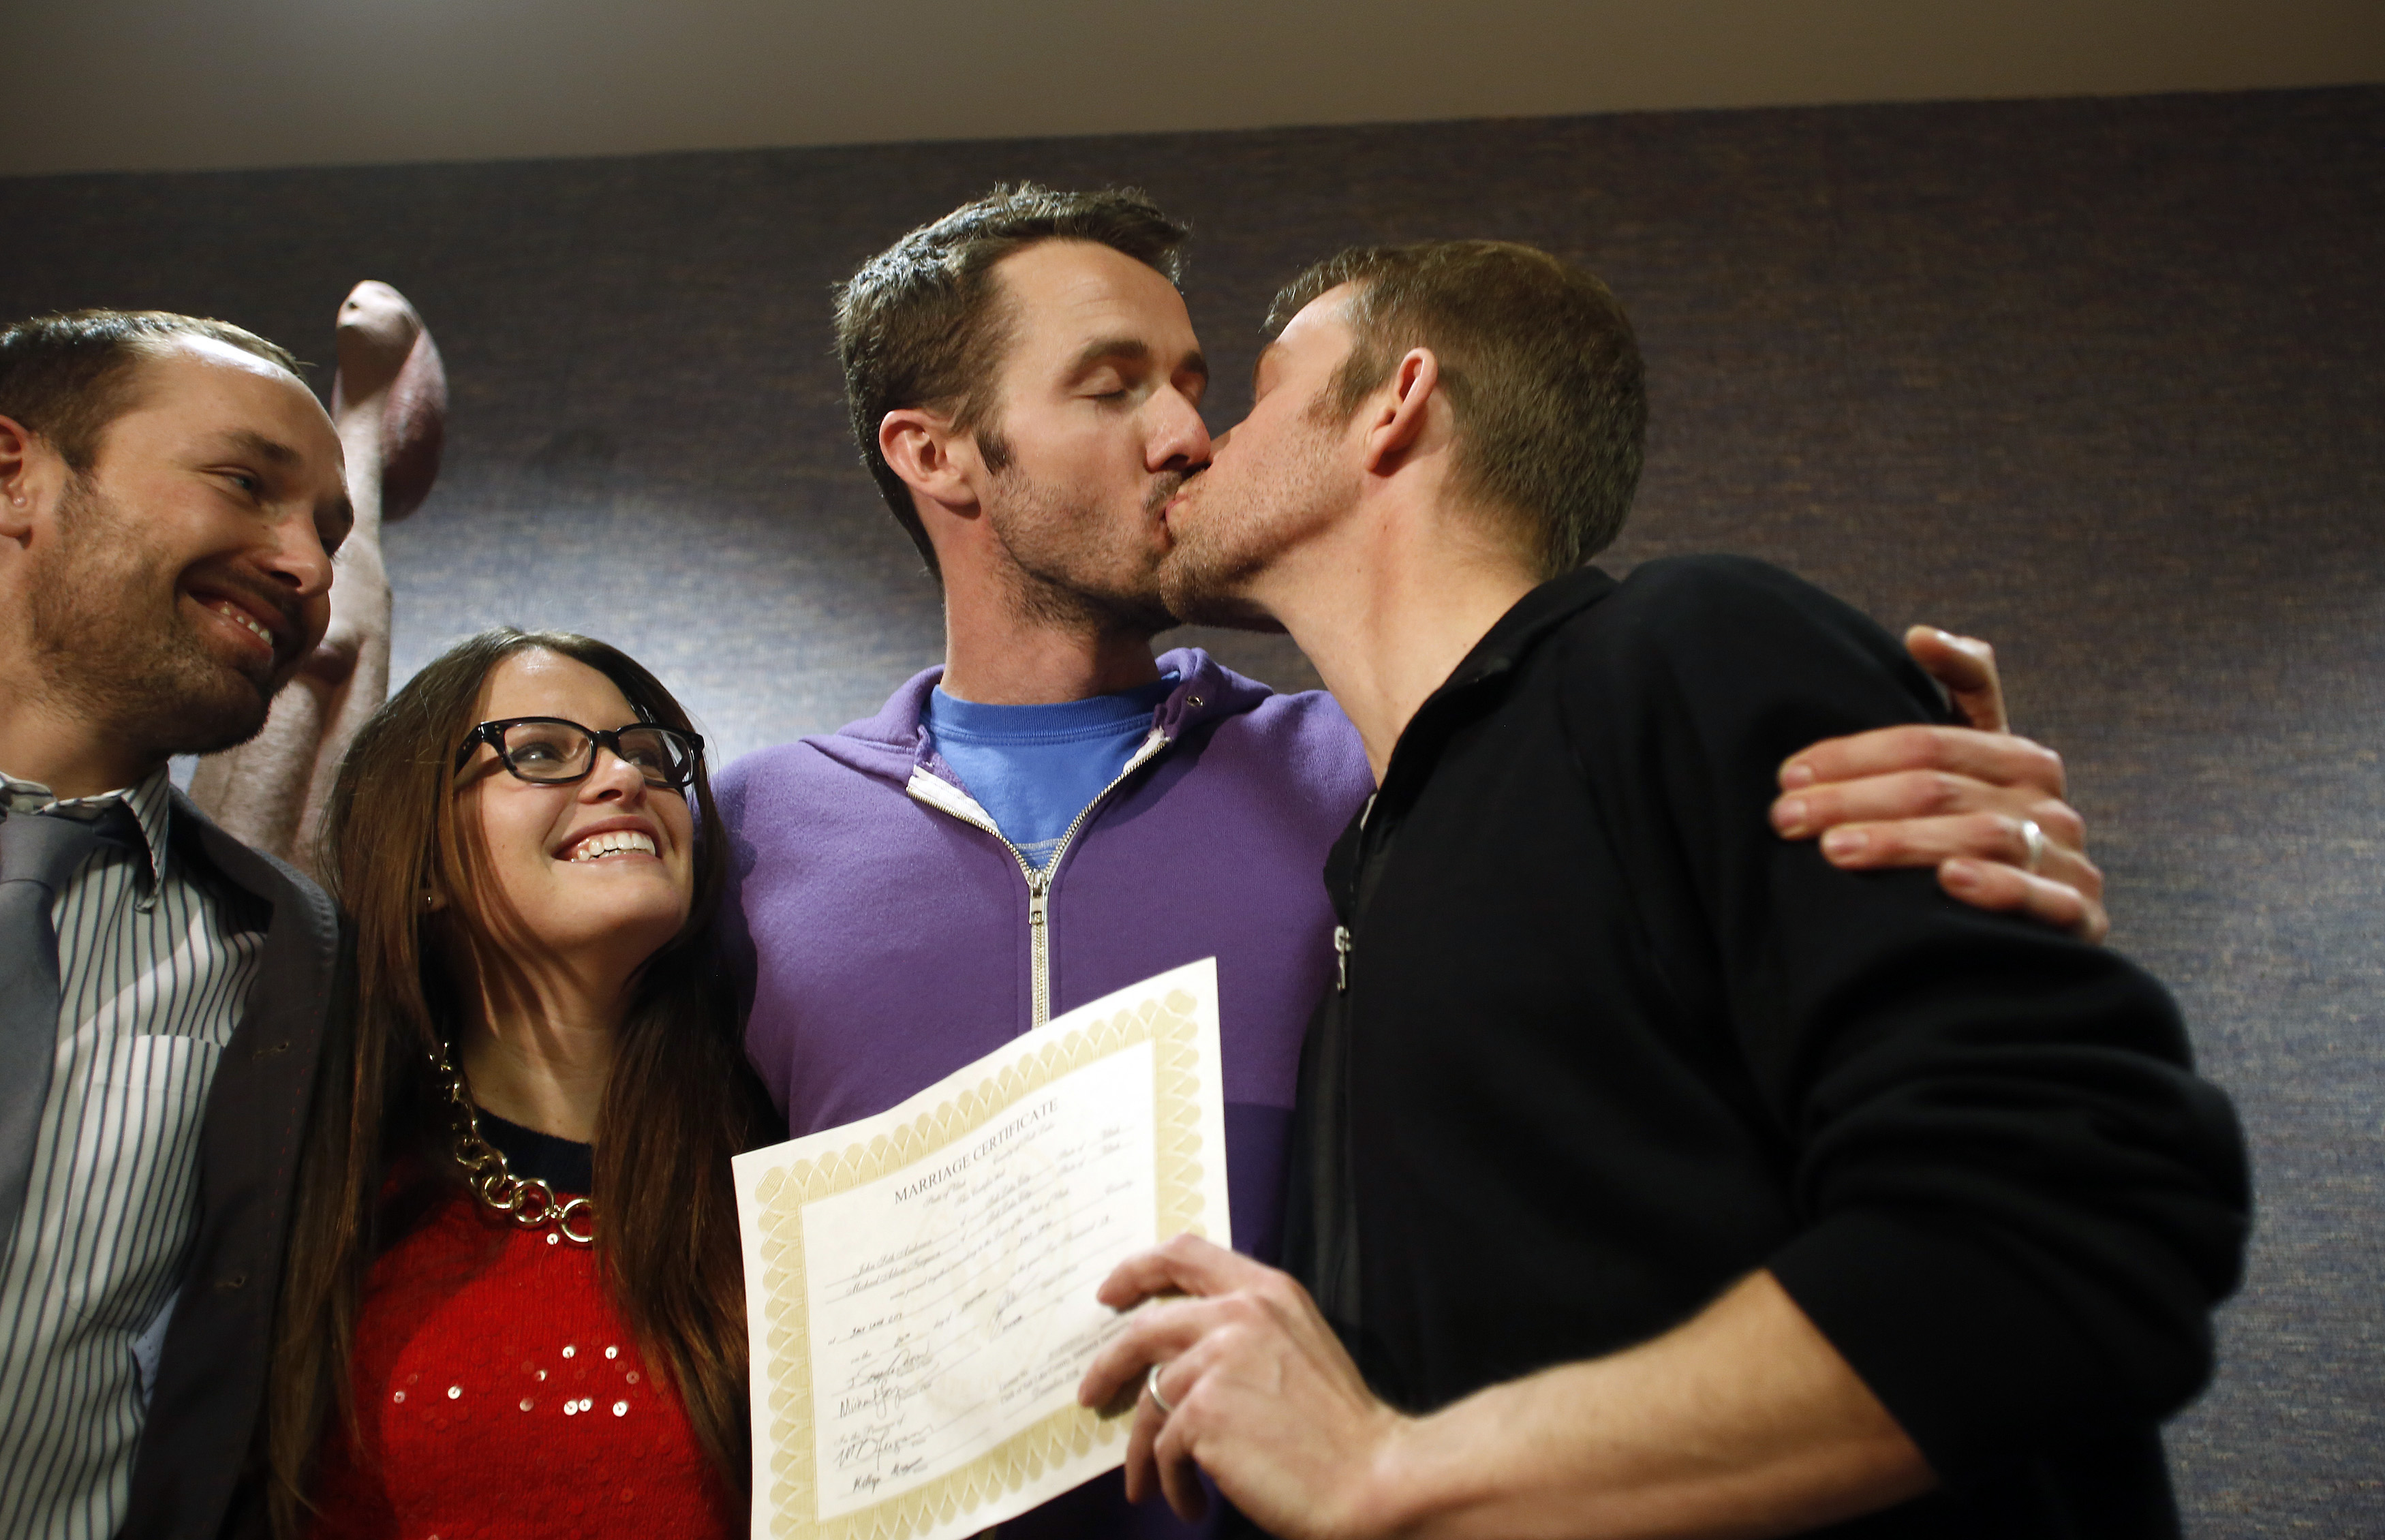 Half Of Americans Support Legal Gay Marriage